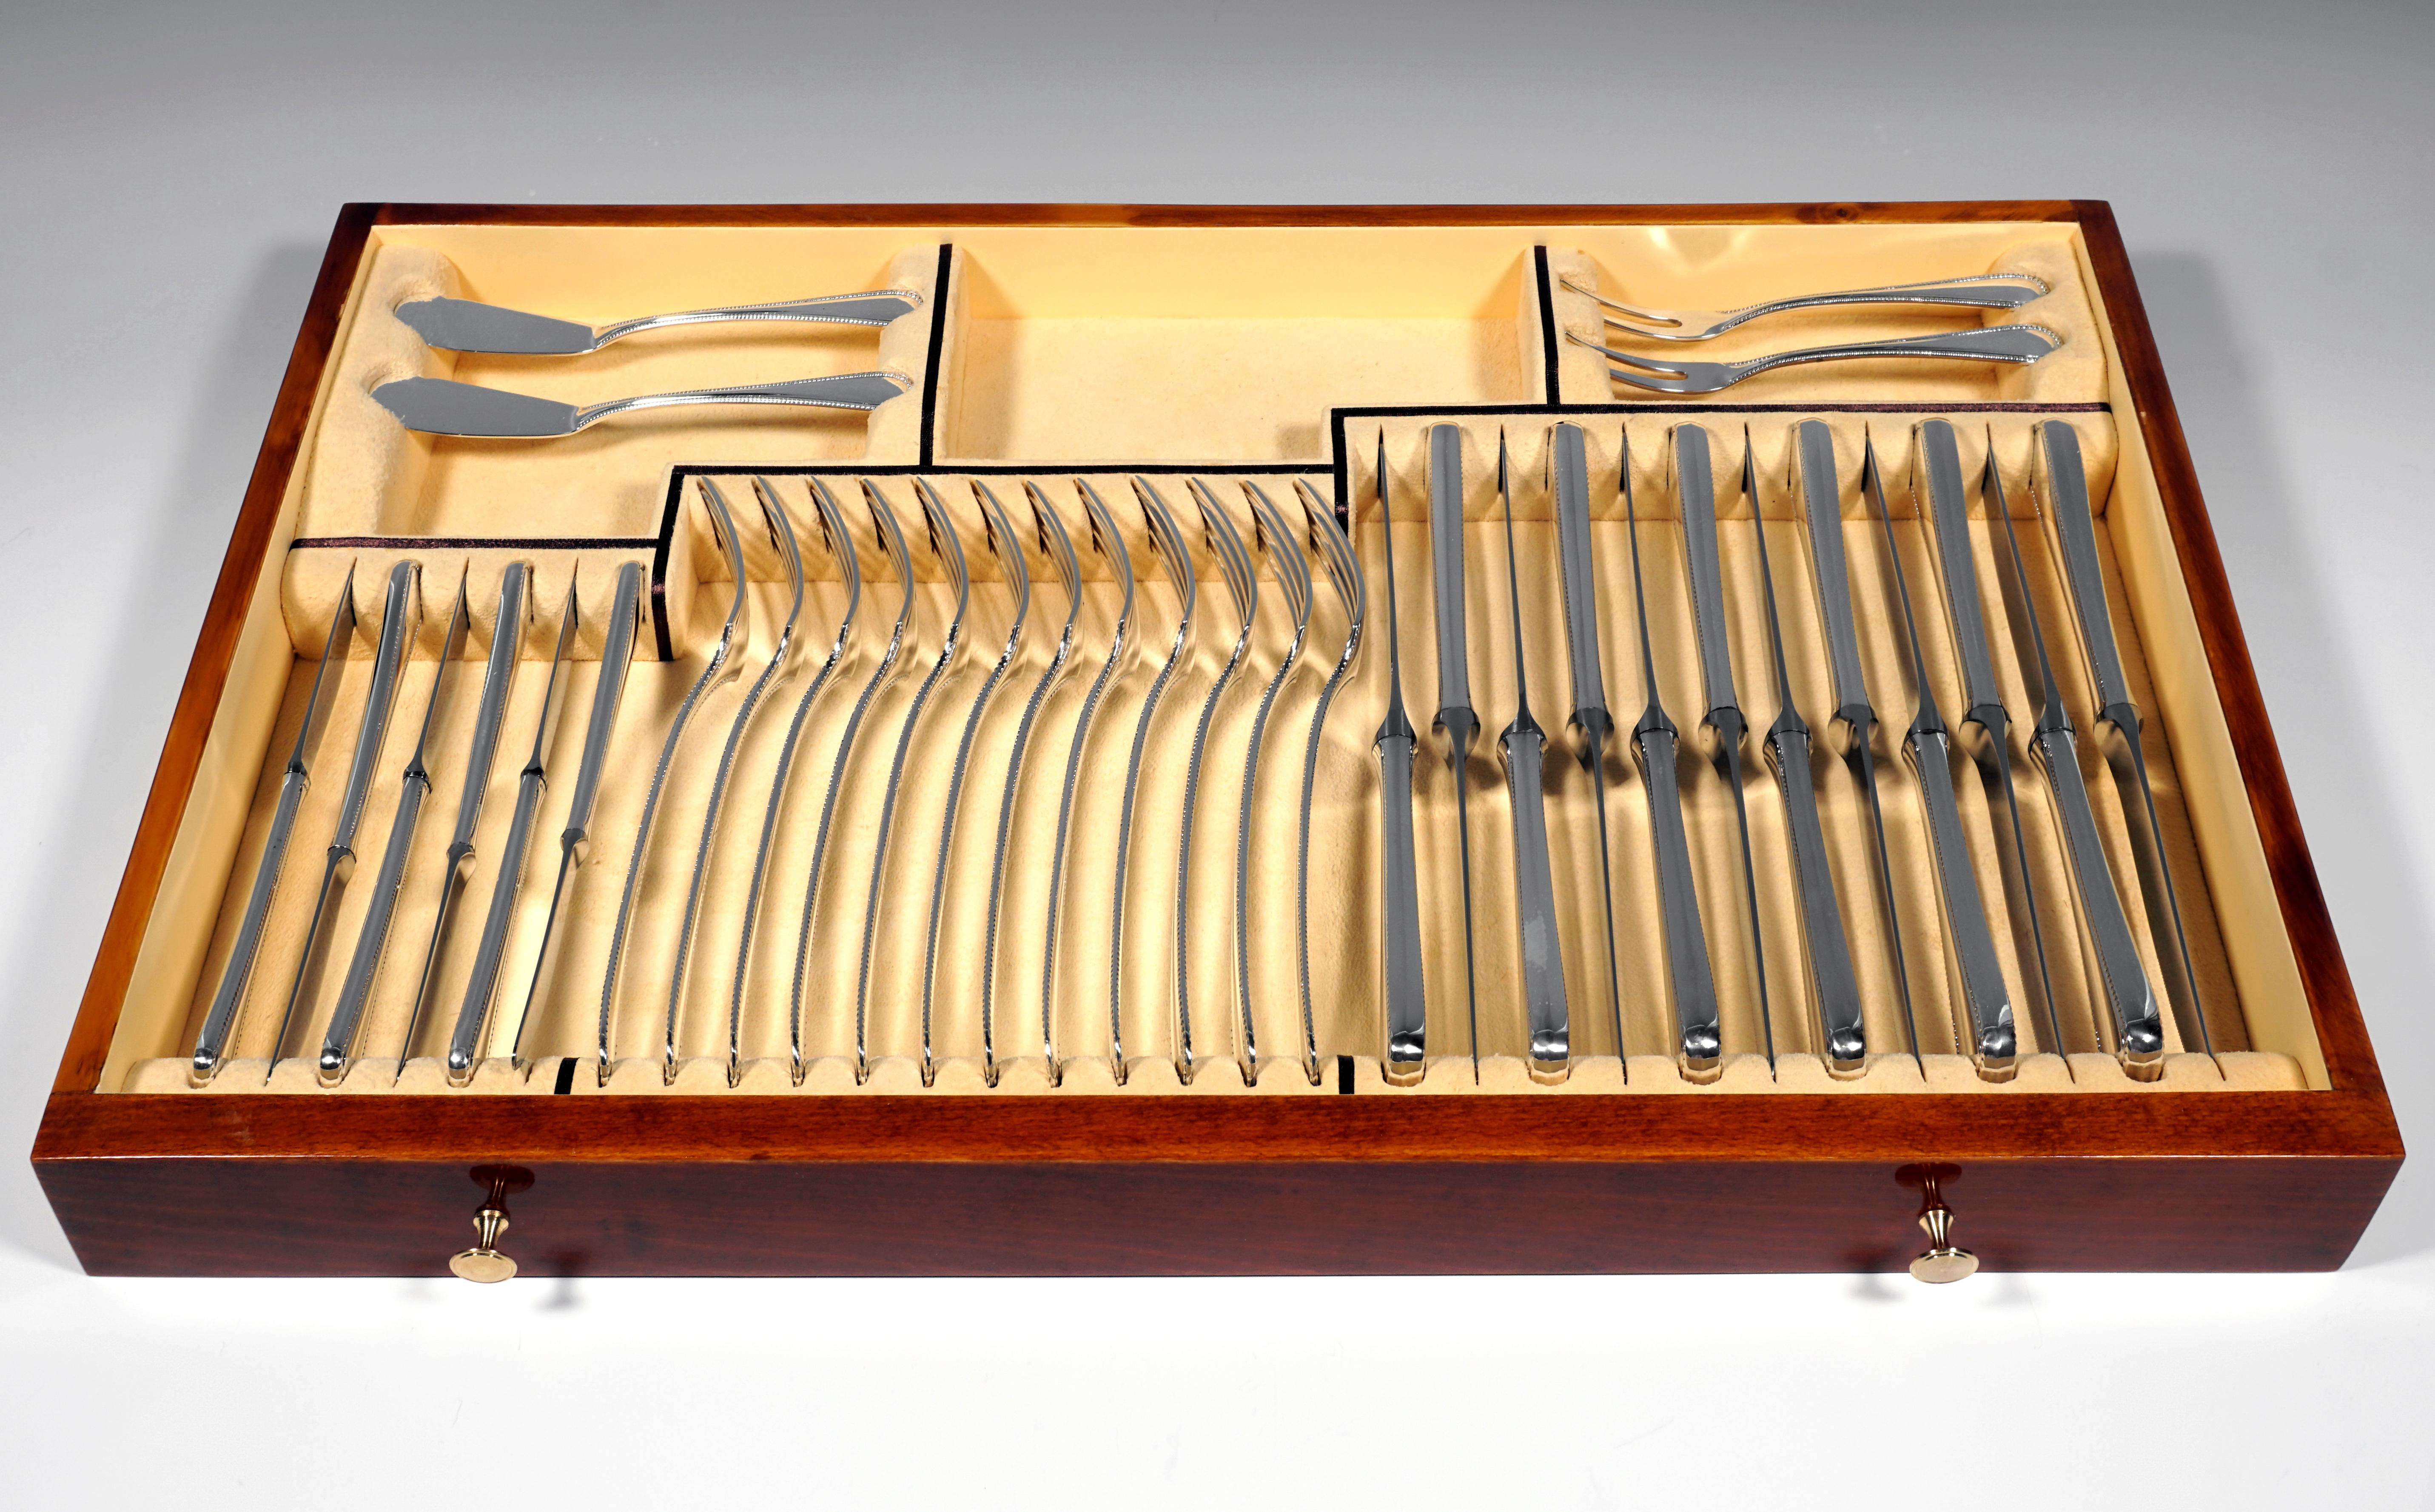 Hand-Crafted Silver Cutlery Set for 12 People in Showcase by Wilkens & Sons Germany, ca  1900